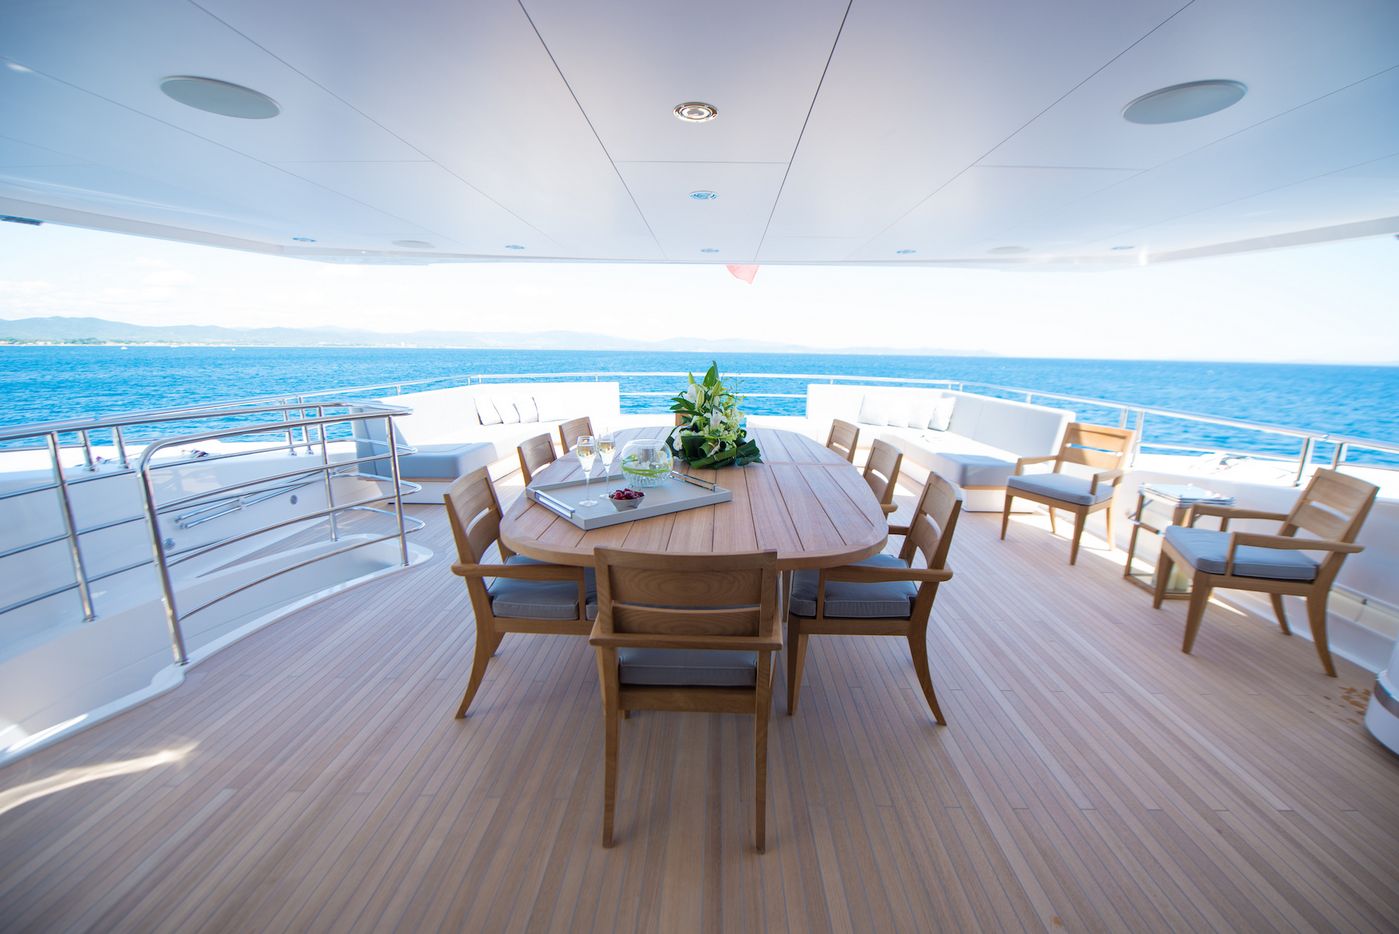 Sunseeker Aqua Libra super yacht charter outdoor lunch area & dining area - High Point Yachting